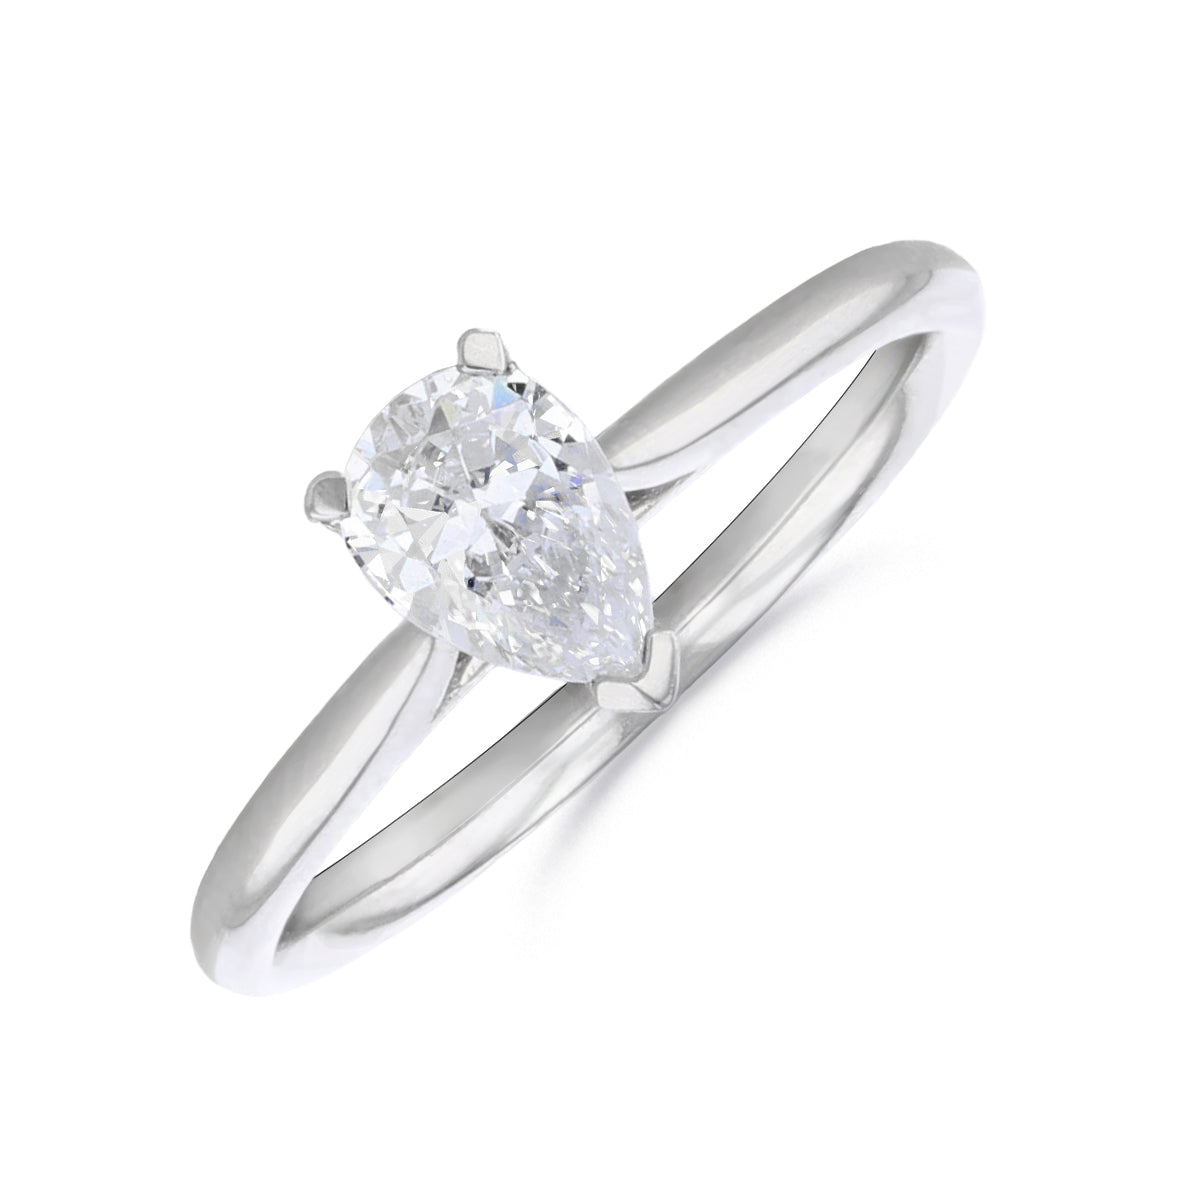 1.20ct Ophelia Pear Cut Diamond Solitaire Engagement Ring | 18ct White Gold